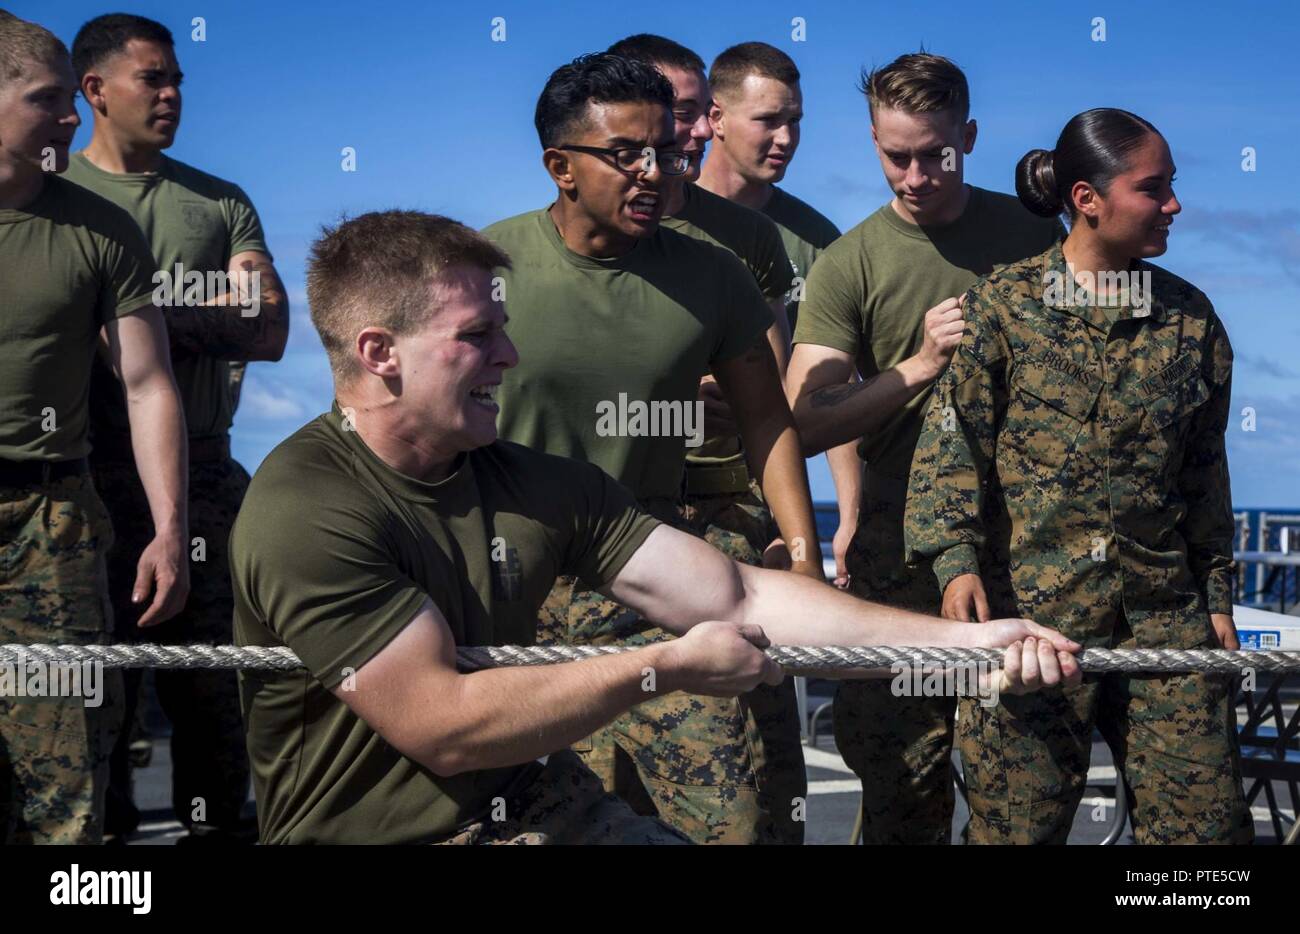 U.S. Marine Corps Cpl. Raymond Miller with Task Force Koa Moana 17, participates in a game of Tug-of-War against French soldiers in celebration for Bastille Day aboard the USNS Sacagawea on July 14, 2017. Bastille Day is recognized as the day the French gained their freedom from King Louis XVI by liberating prisoners from the Bastille Prison in 1789 and are now celebrating their 228thyear as a free nation. Stock Photo